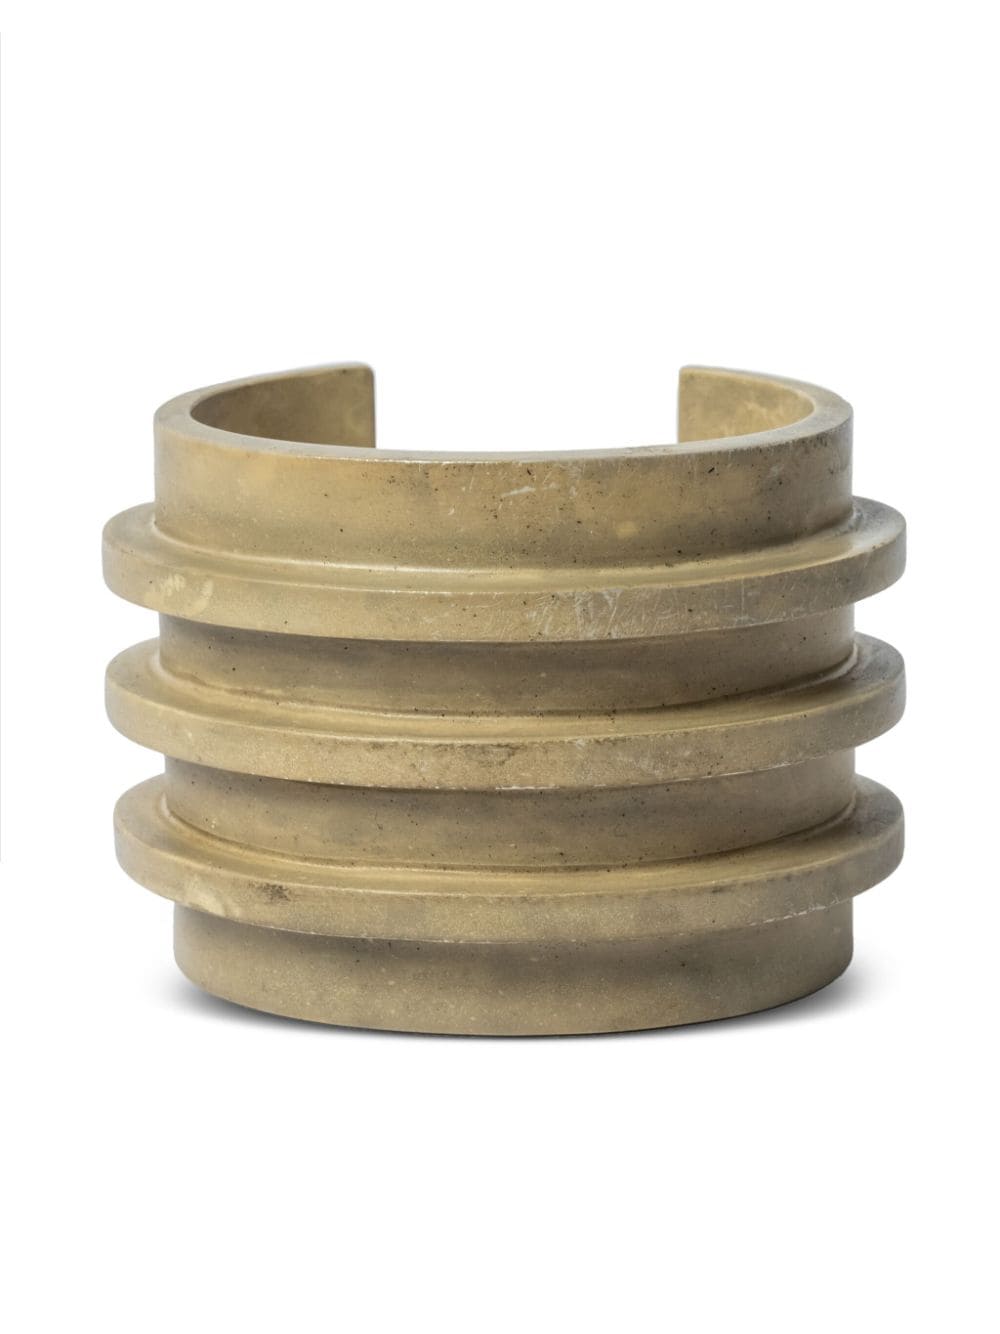 Parts Of Four Ultra Reduction Ridged Bracelet In Gold